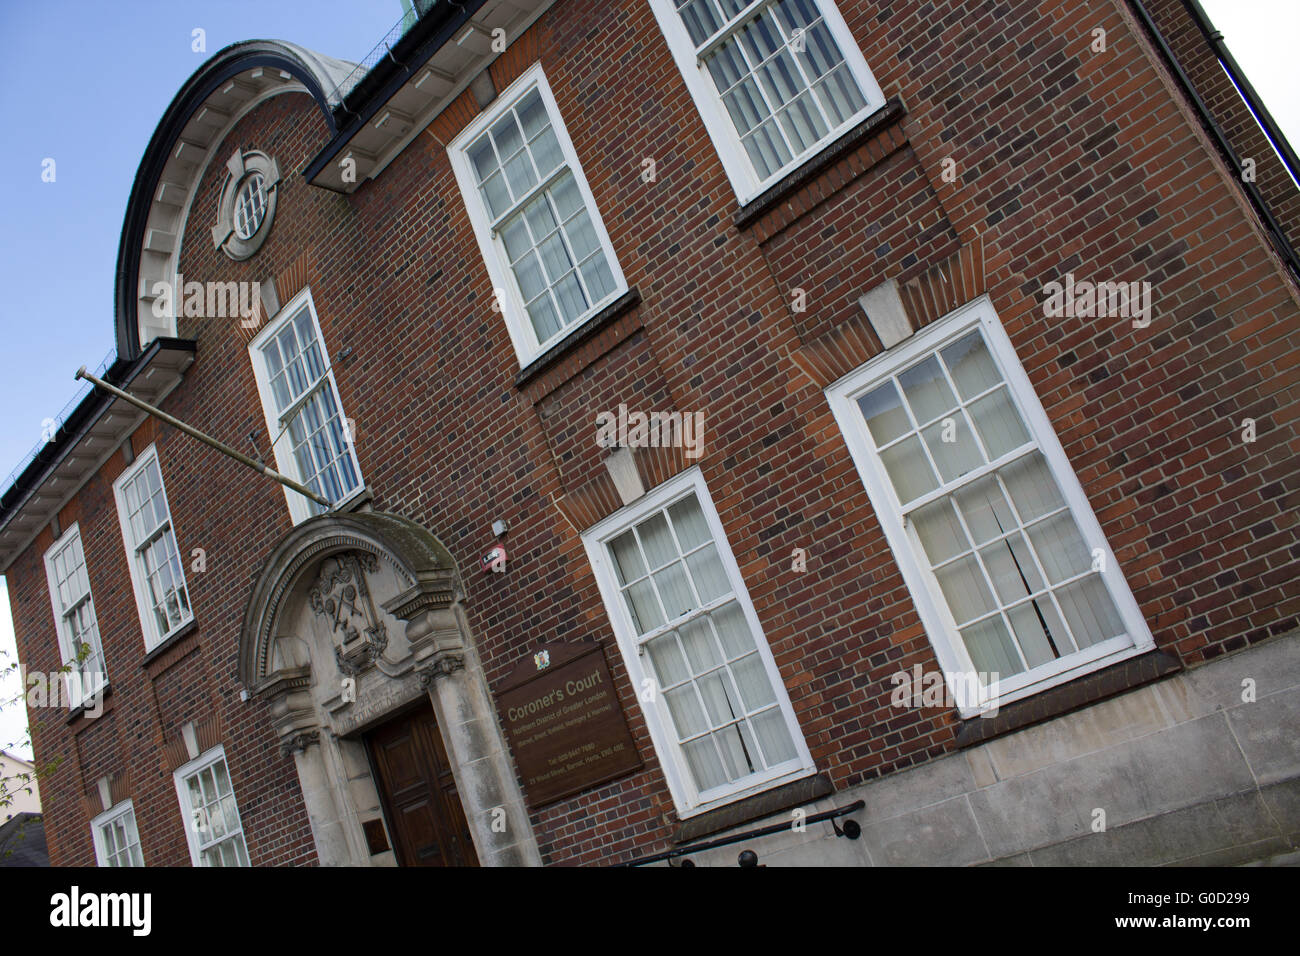 The exterior of the Coroner's Court in Barnet, North London, UK Stock Photo